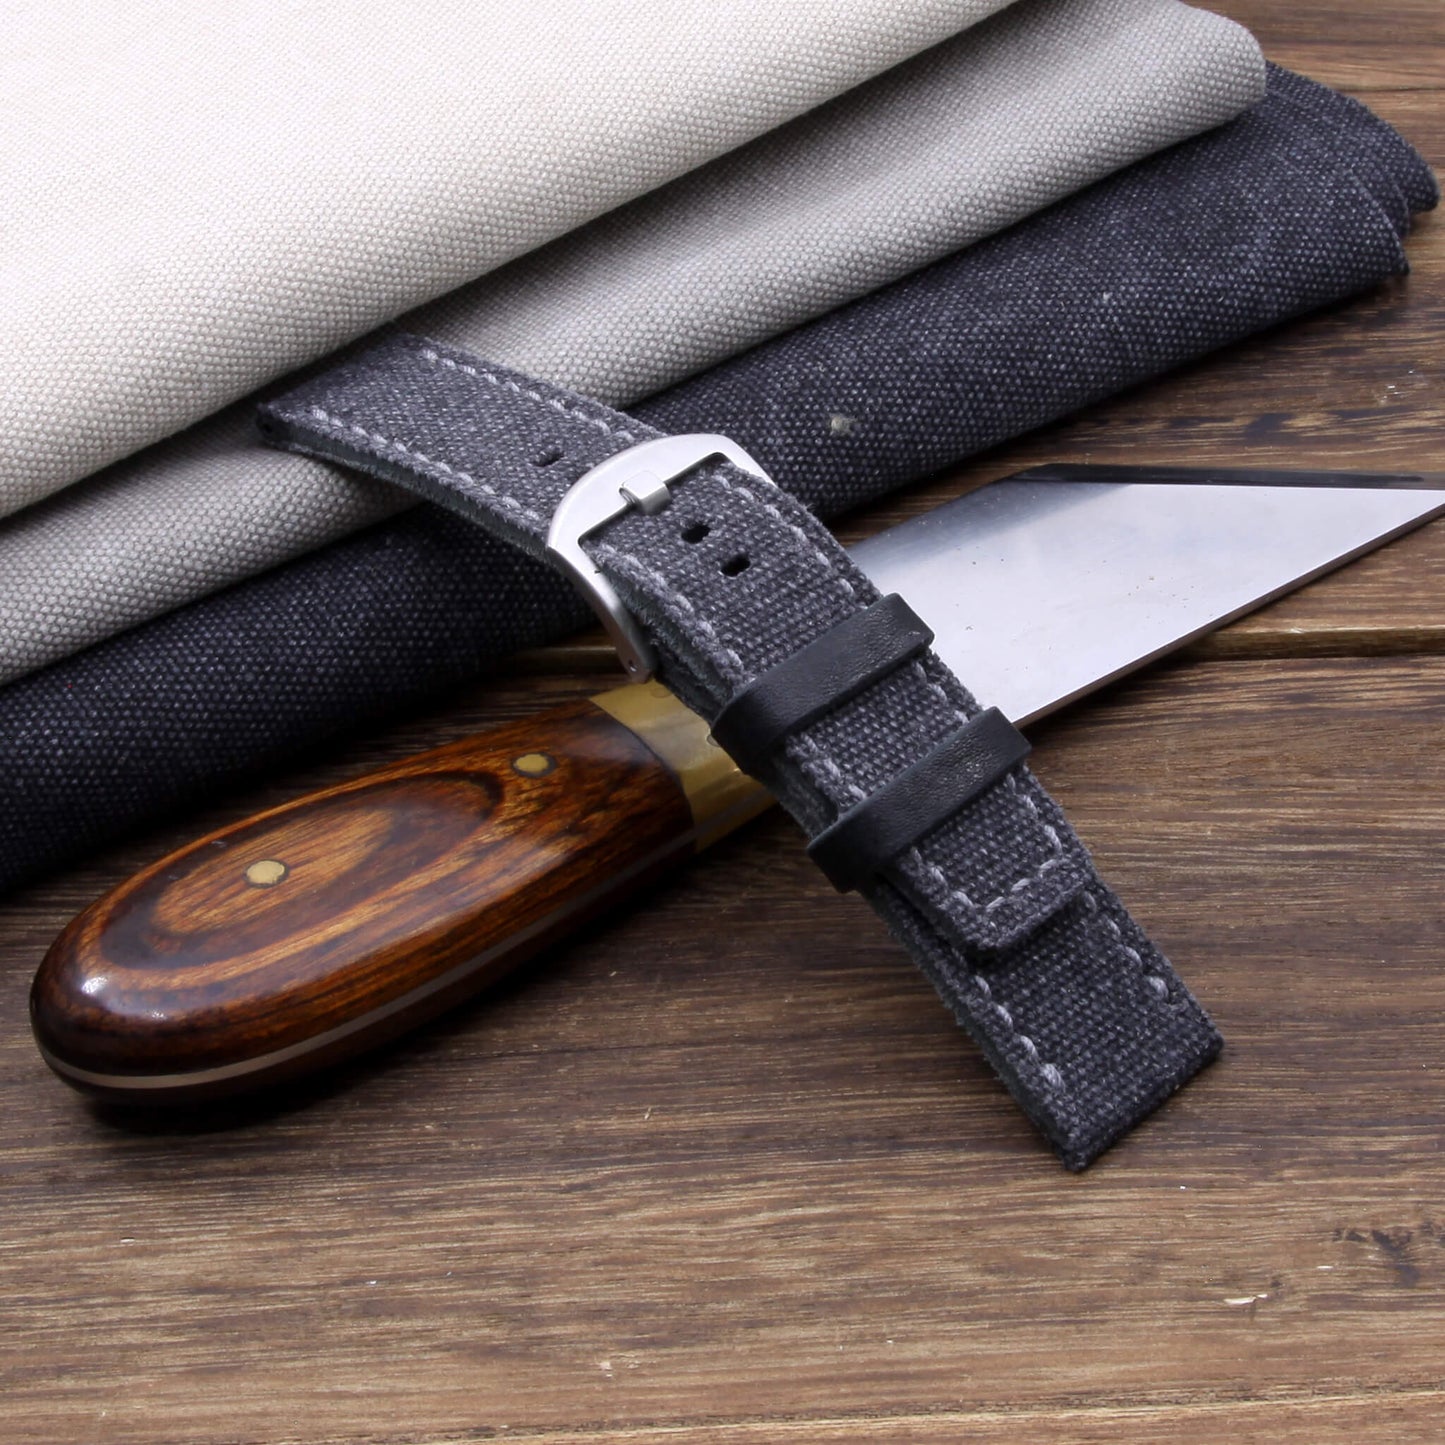 4th View of 2-Piece Full Stitch Leather Watch Strap, made with Stone Washed Black Canvas and Italian veg-tanned leather lining, handcrafted by Cozy Handmade